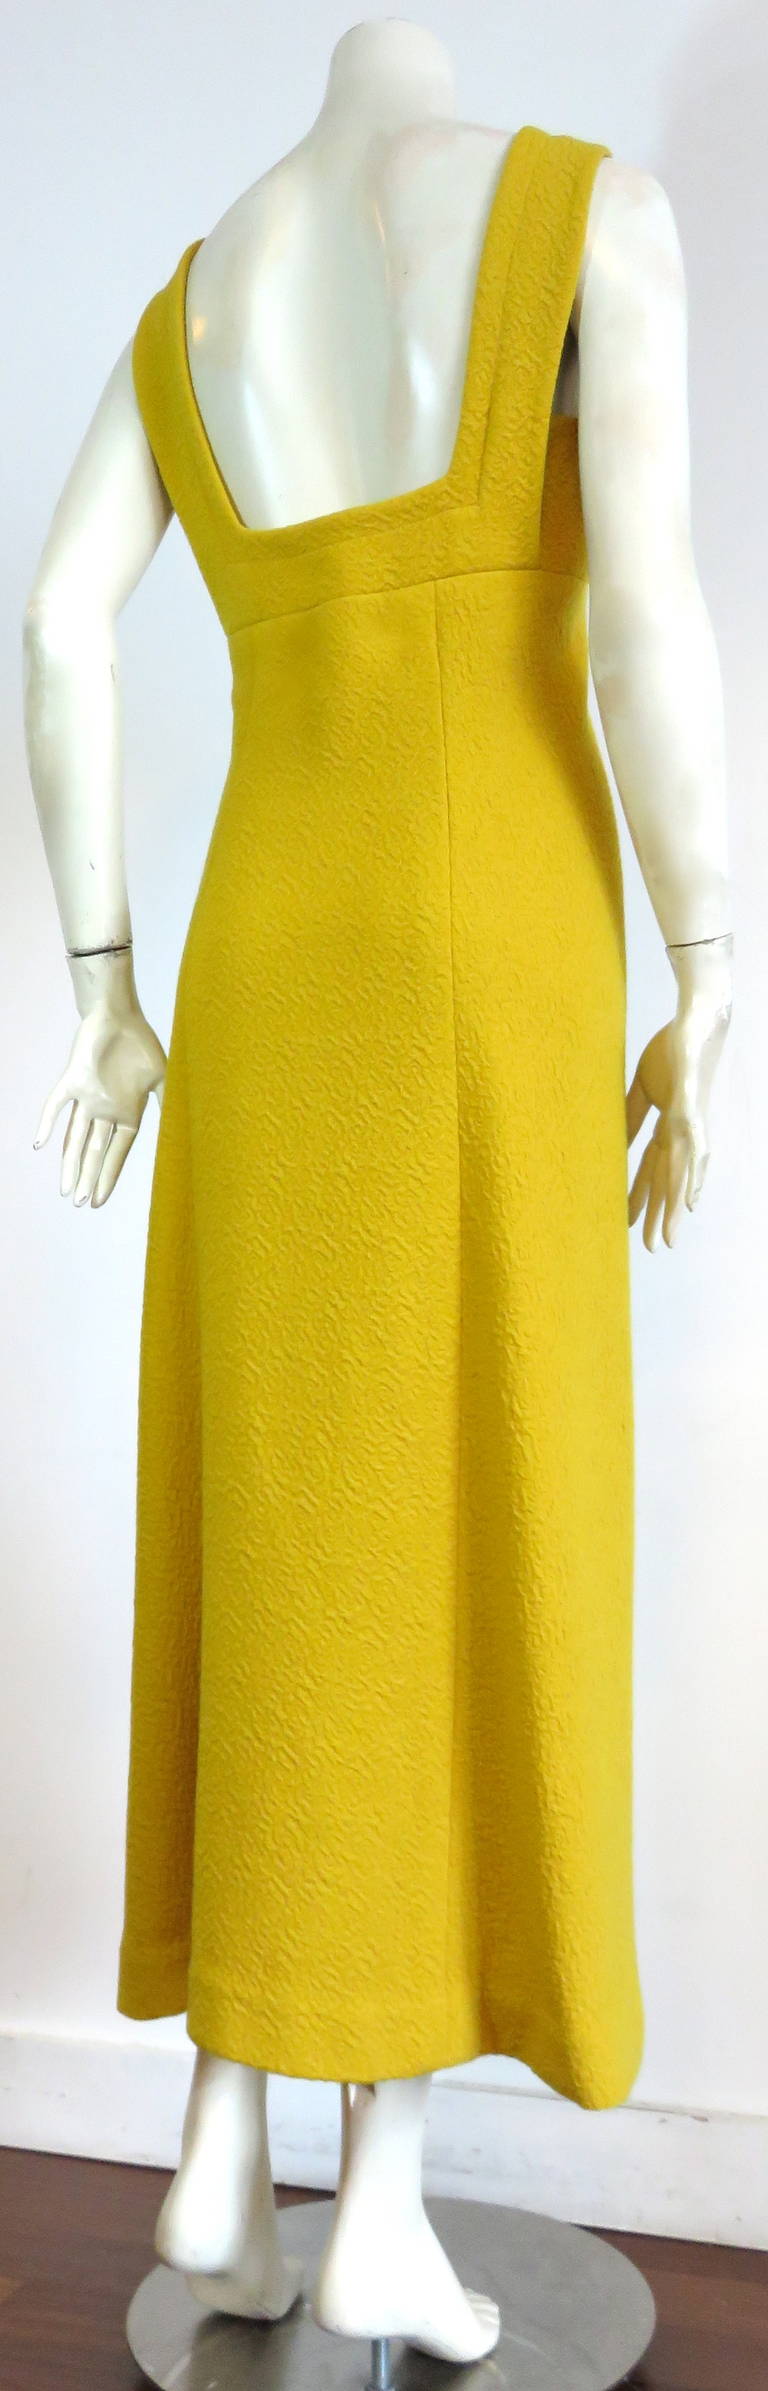 1960's GALANOS Yellow crepe empire dress For Sale 4